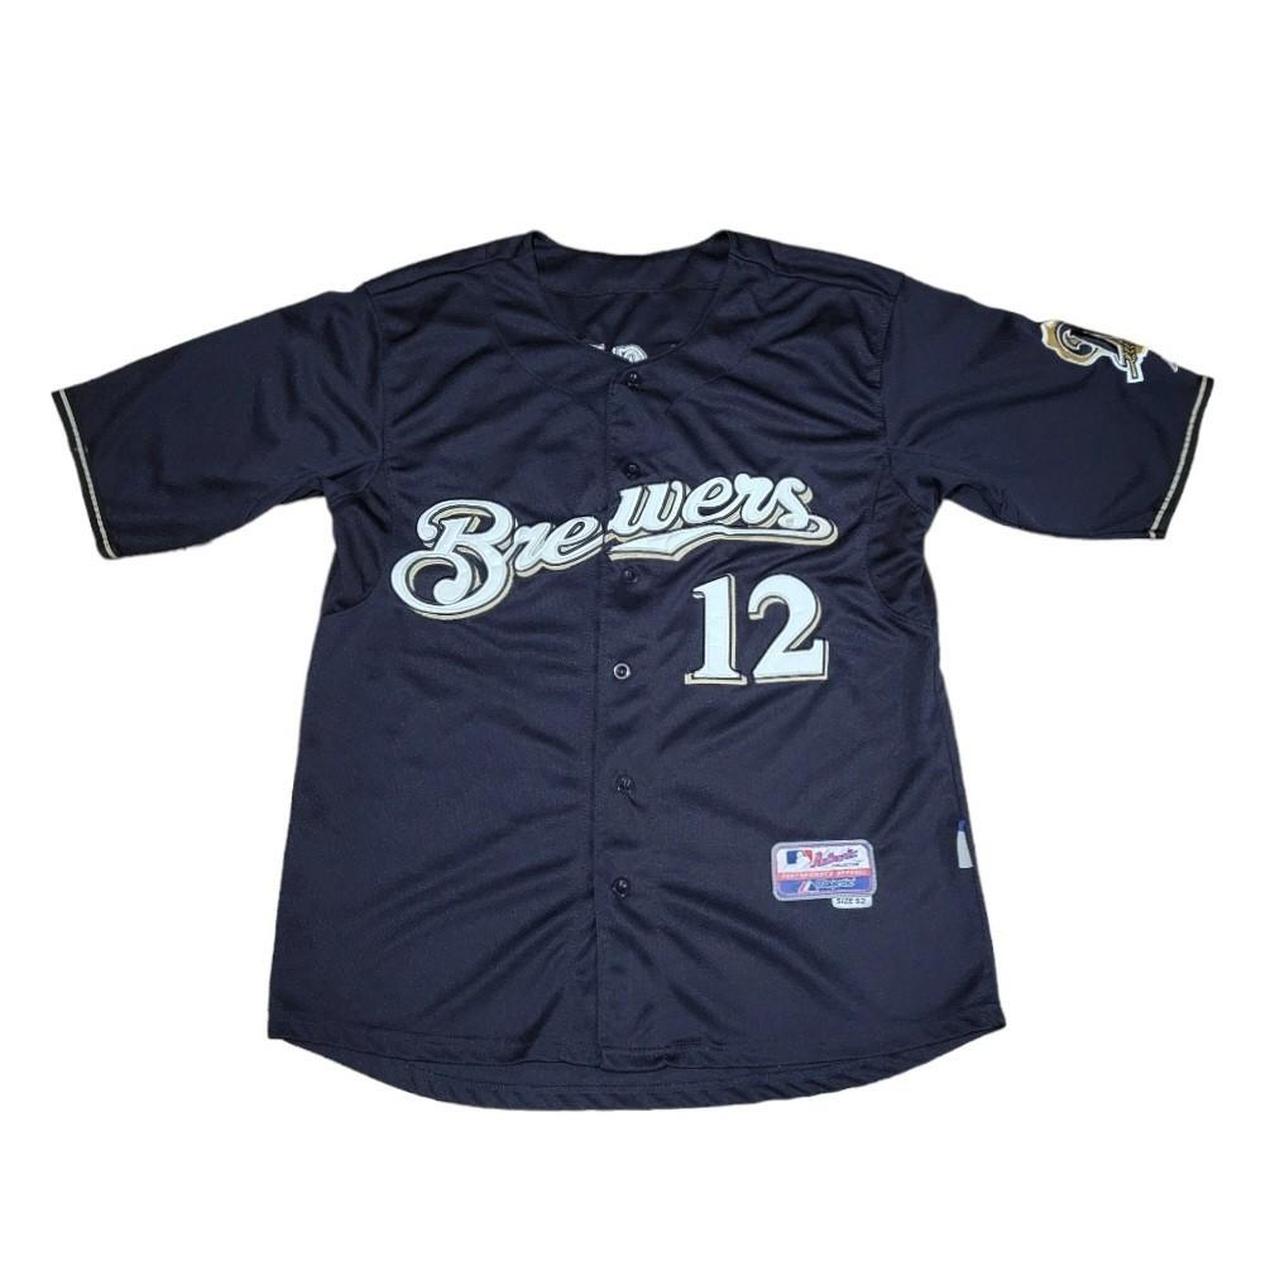  Majestic Milwaukee Brewers MLB Men's White Authentic